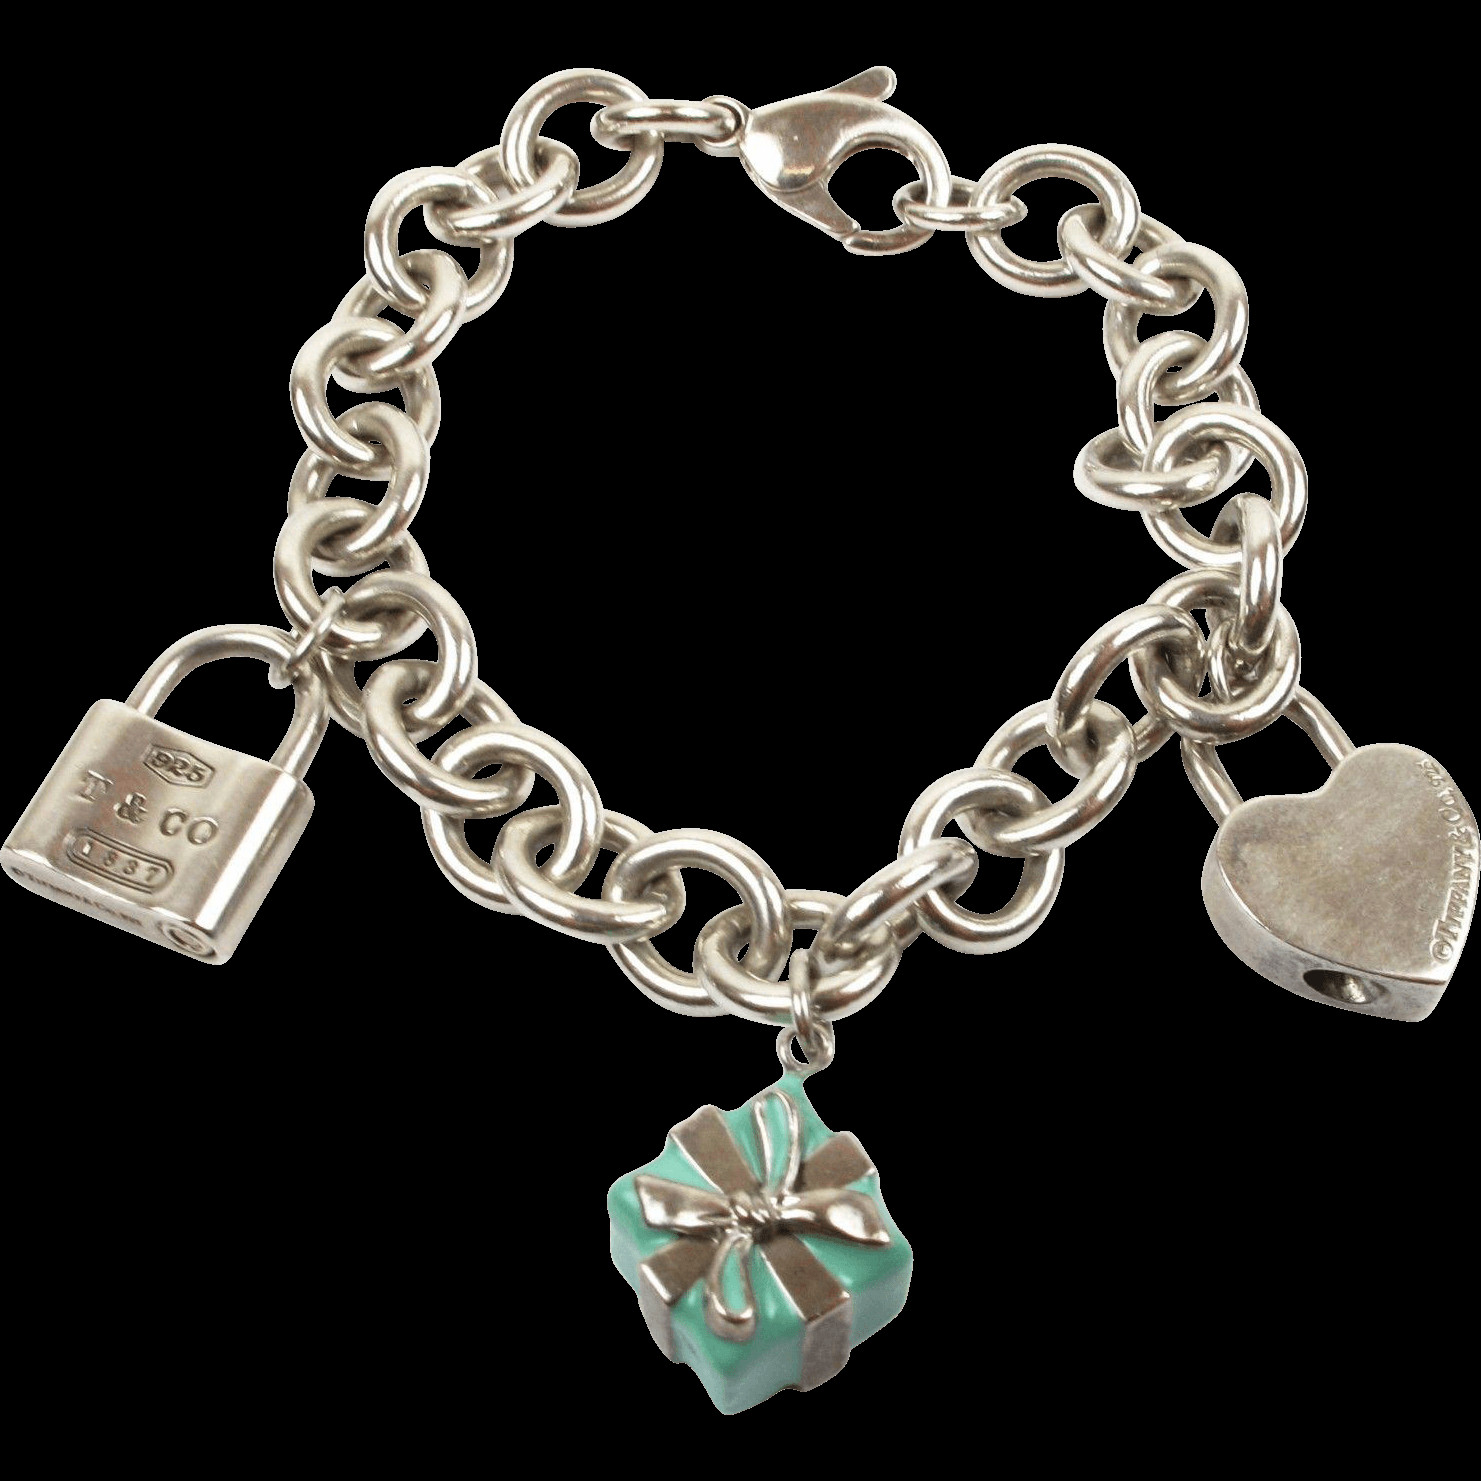 Tiffany Bracelet Charms
 Authentic Tiffany & Co Sterling Silver Charm Bracelet with